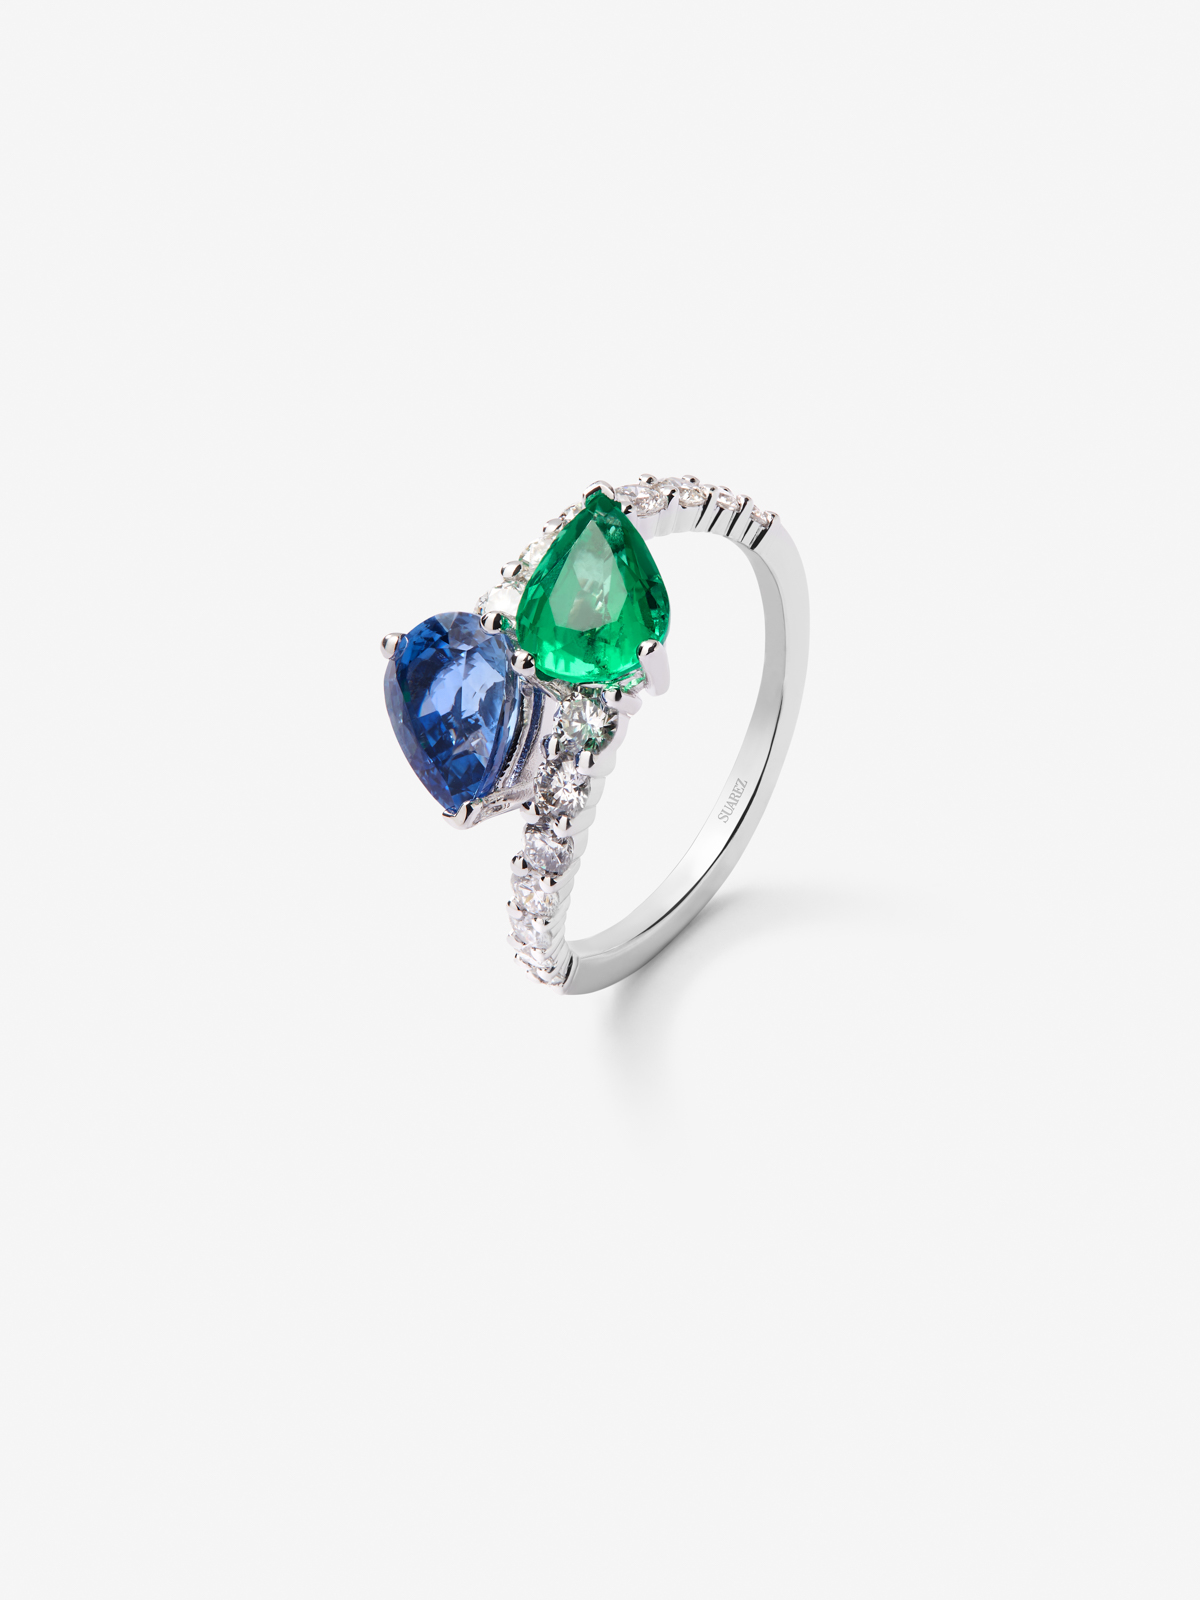 You and I 18k White Gold Ring with intense blue zafiro in 1.49 cts pear size, emerald green in 1.04 cts pear size and white diamonds in a bright size of 0.64 cts